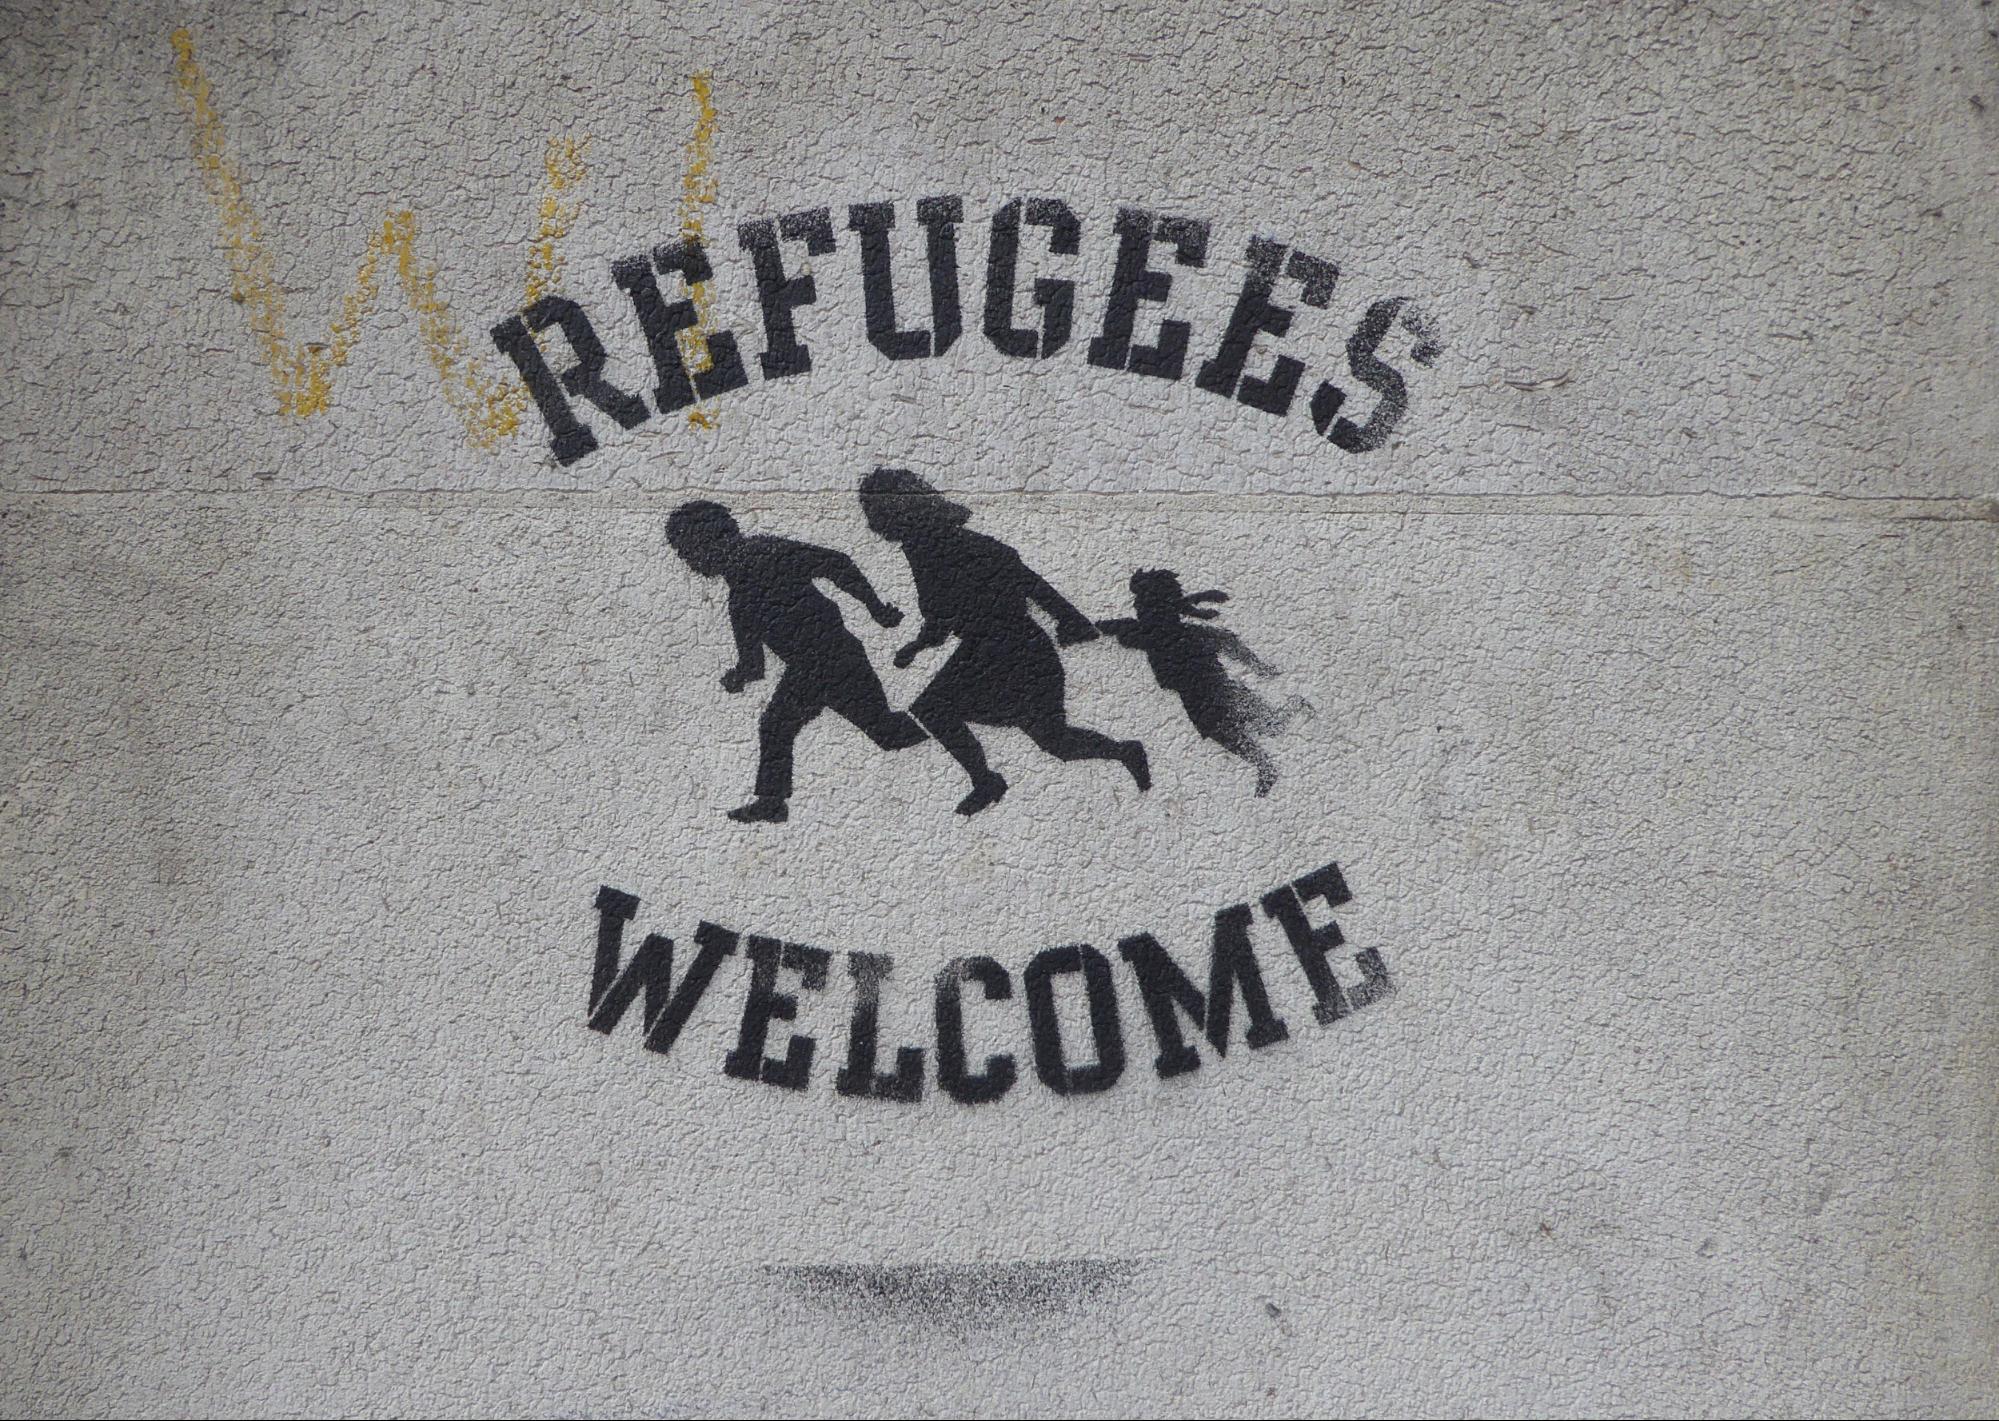 Sign on wall saying "Refugees welcome"